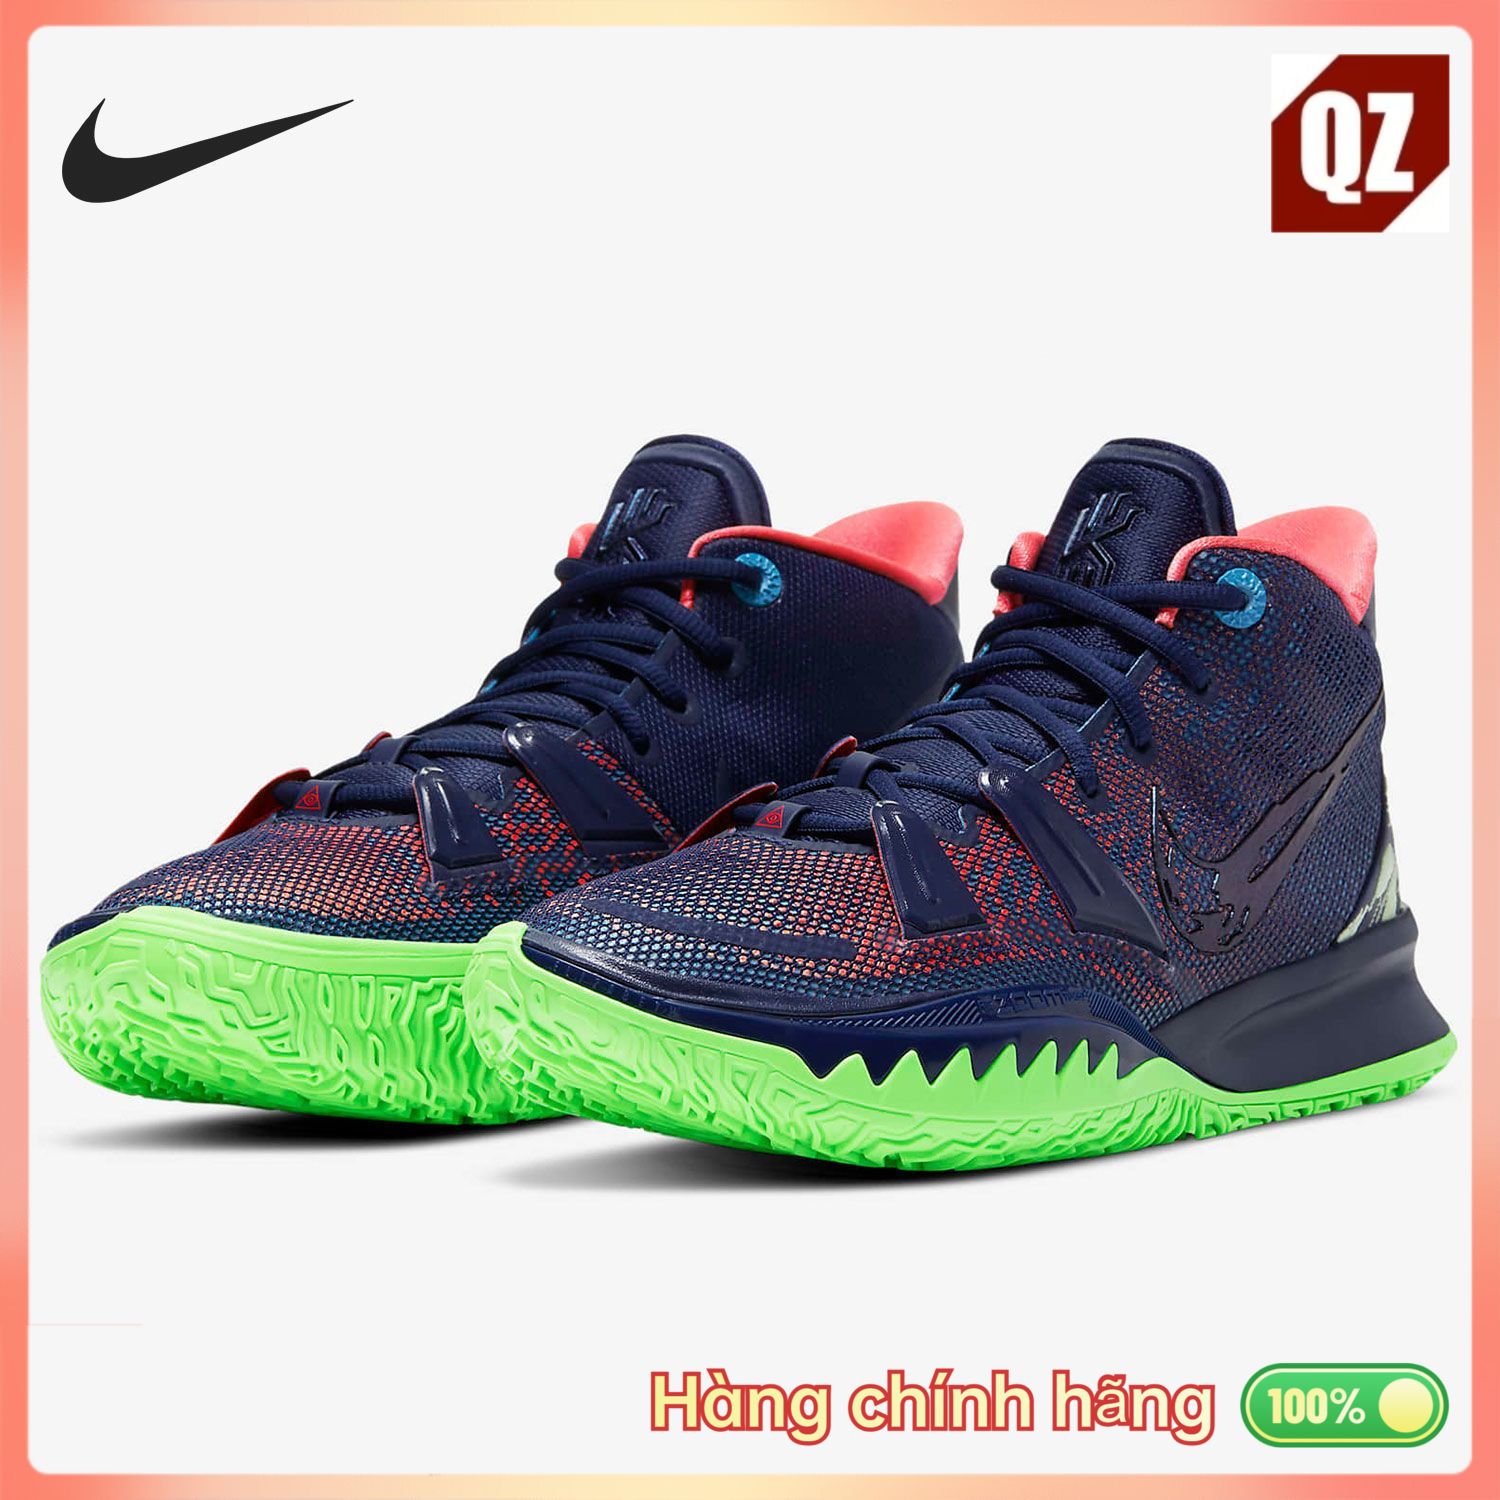 Nike KYRIE 7 EP Kyrie Irving Men s Athletic Basketball Shoes CQ9327